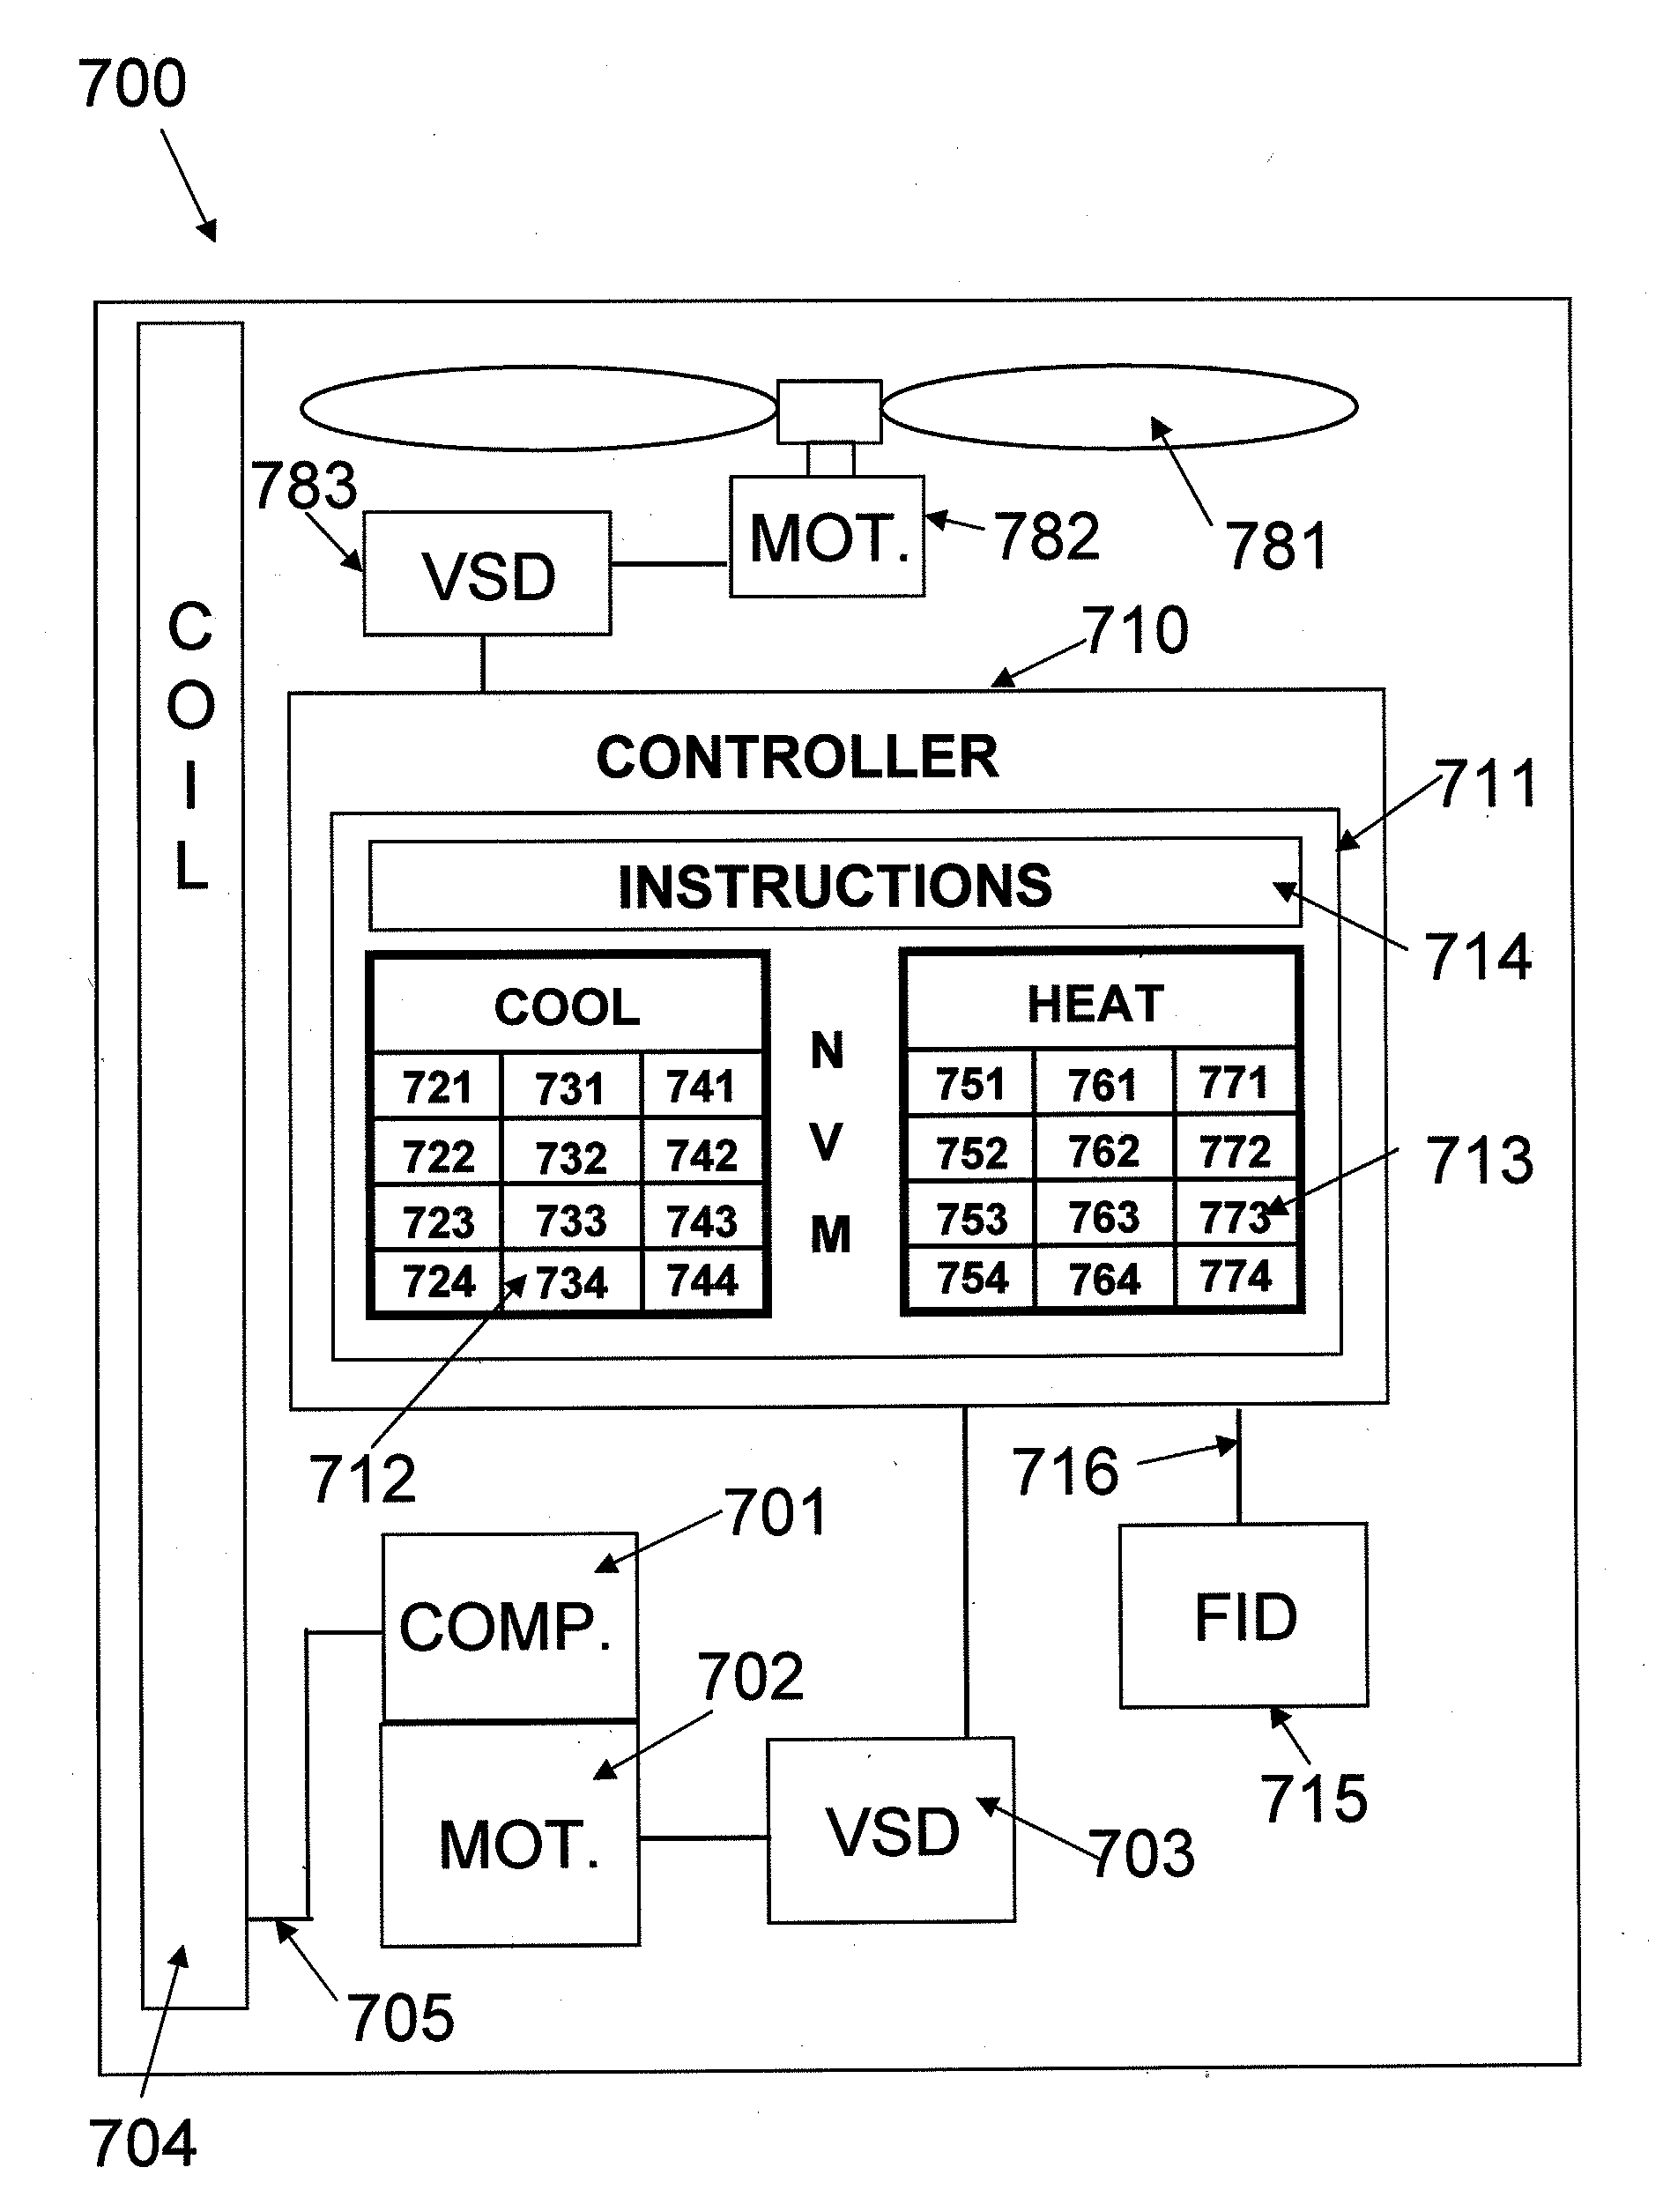 Heat Pumps With Unequal Cooling and Heating Capacities for Climates Where Demand for Cooling and Heating are Unequal, and Method of Adapting and Distributing Such Heat Pumps